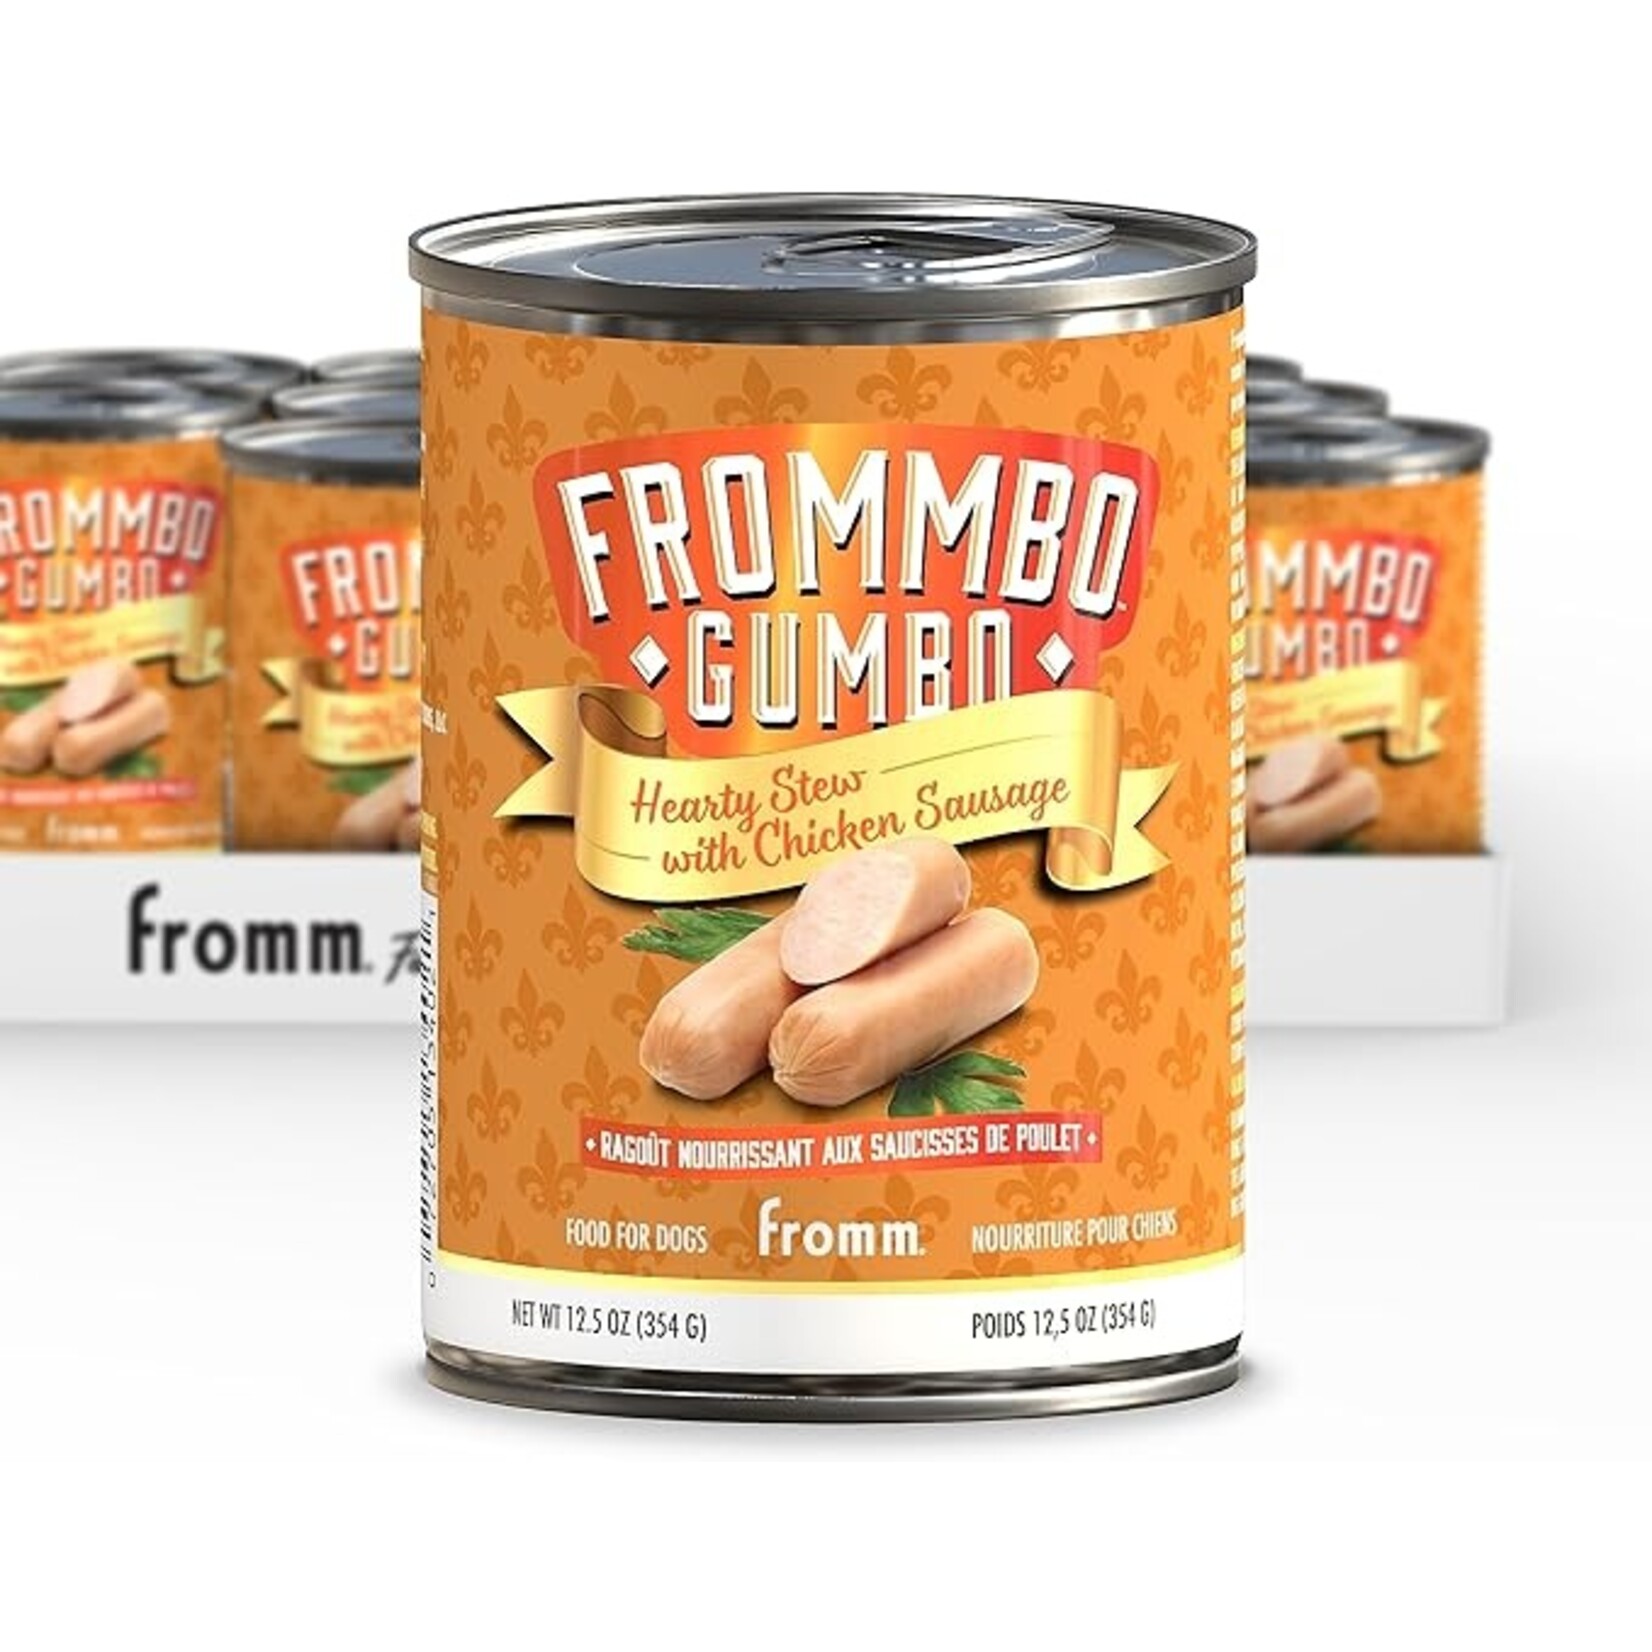 Fromm Frommbo Gumbo Chicken Sausage Hearty Stew 12.5oz